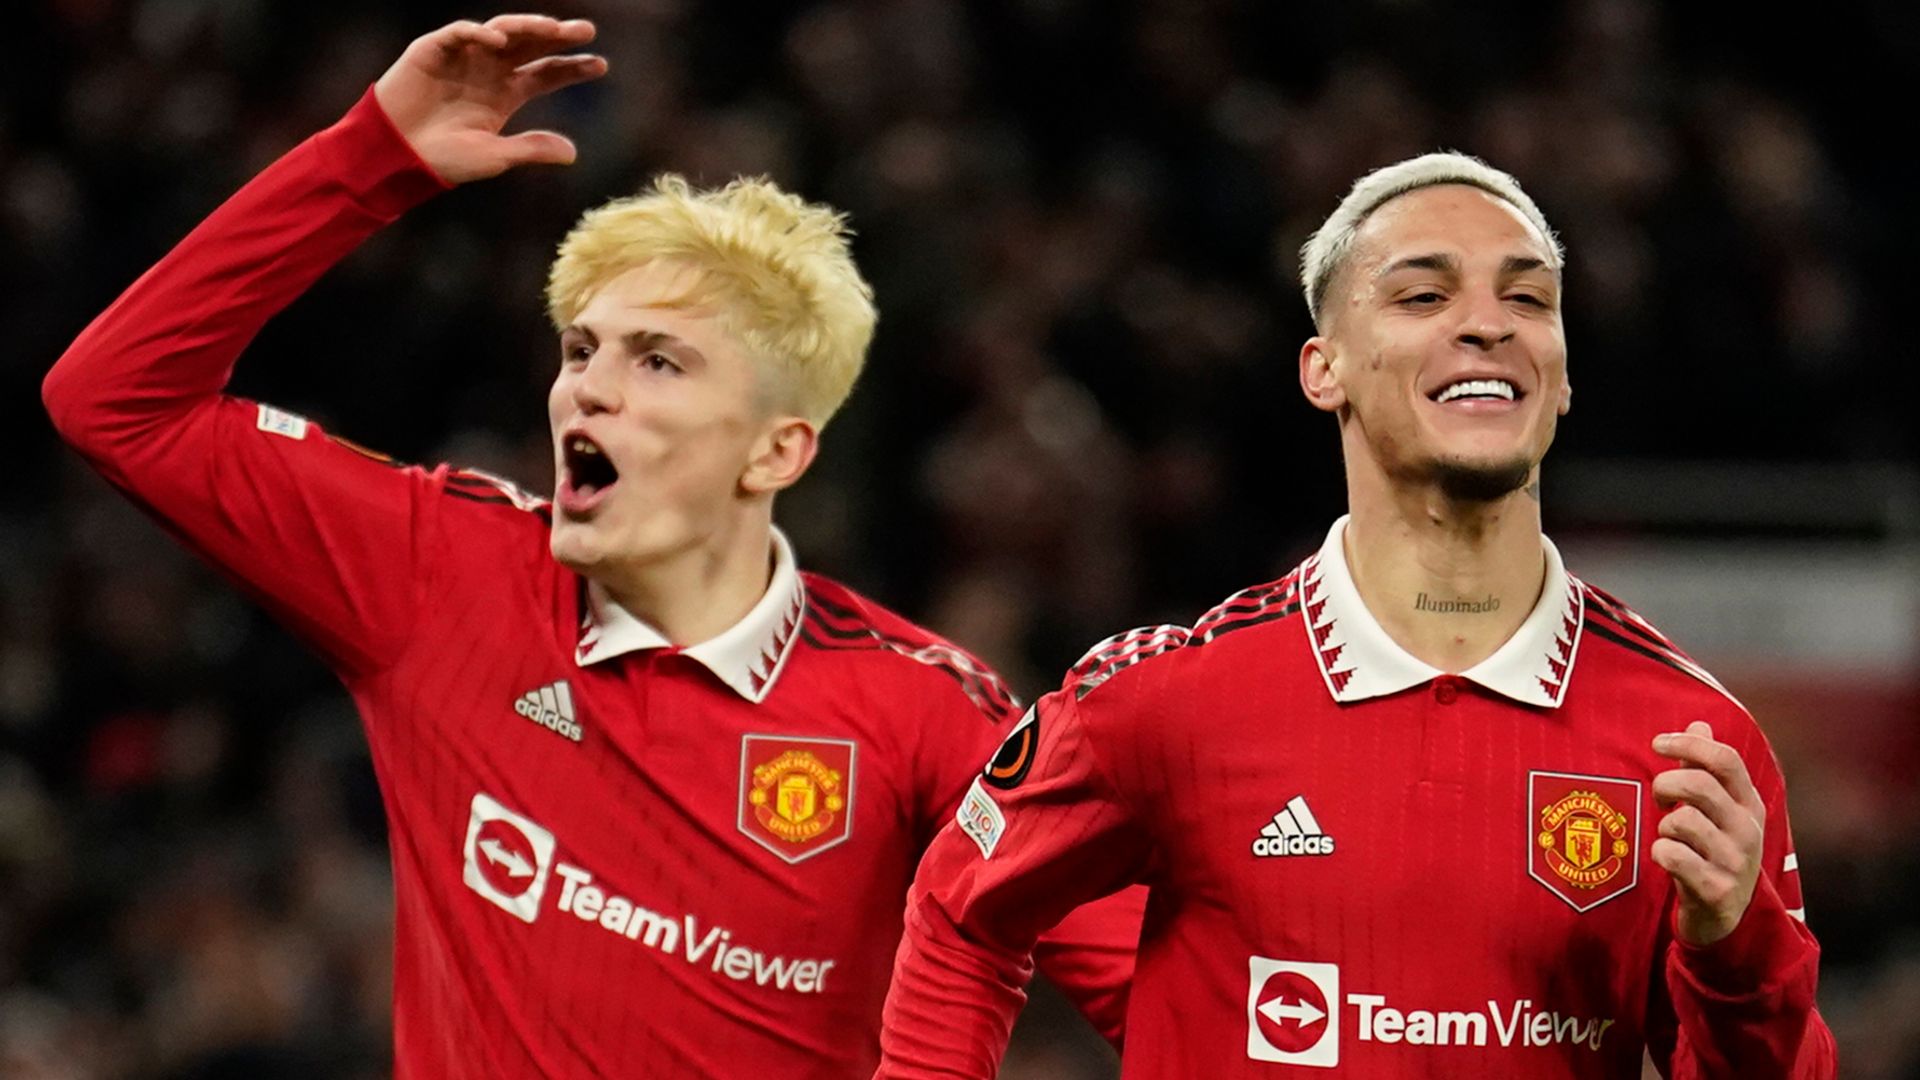 Man Utd fight back to knock out Barca and reach Europa League last 16